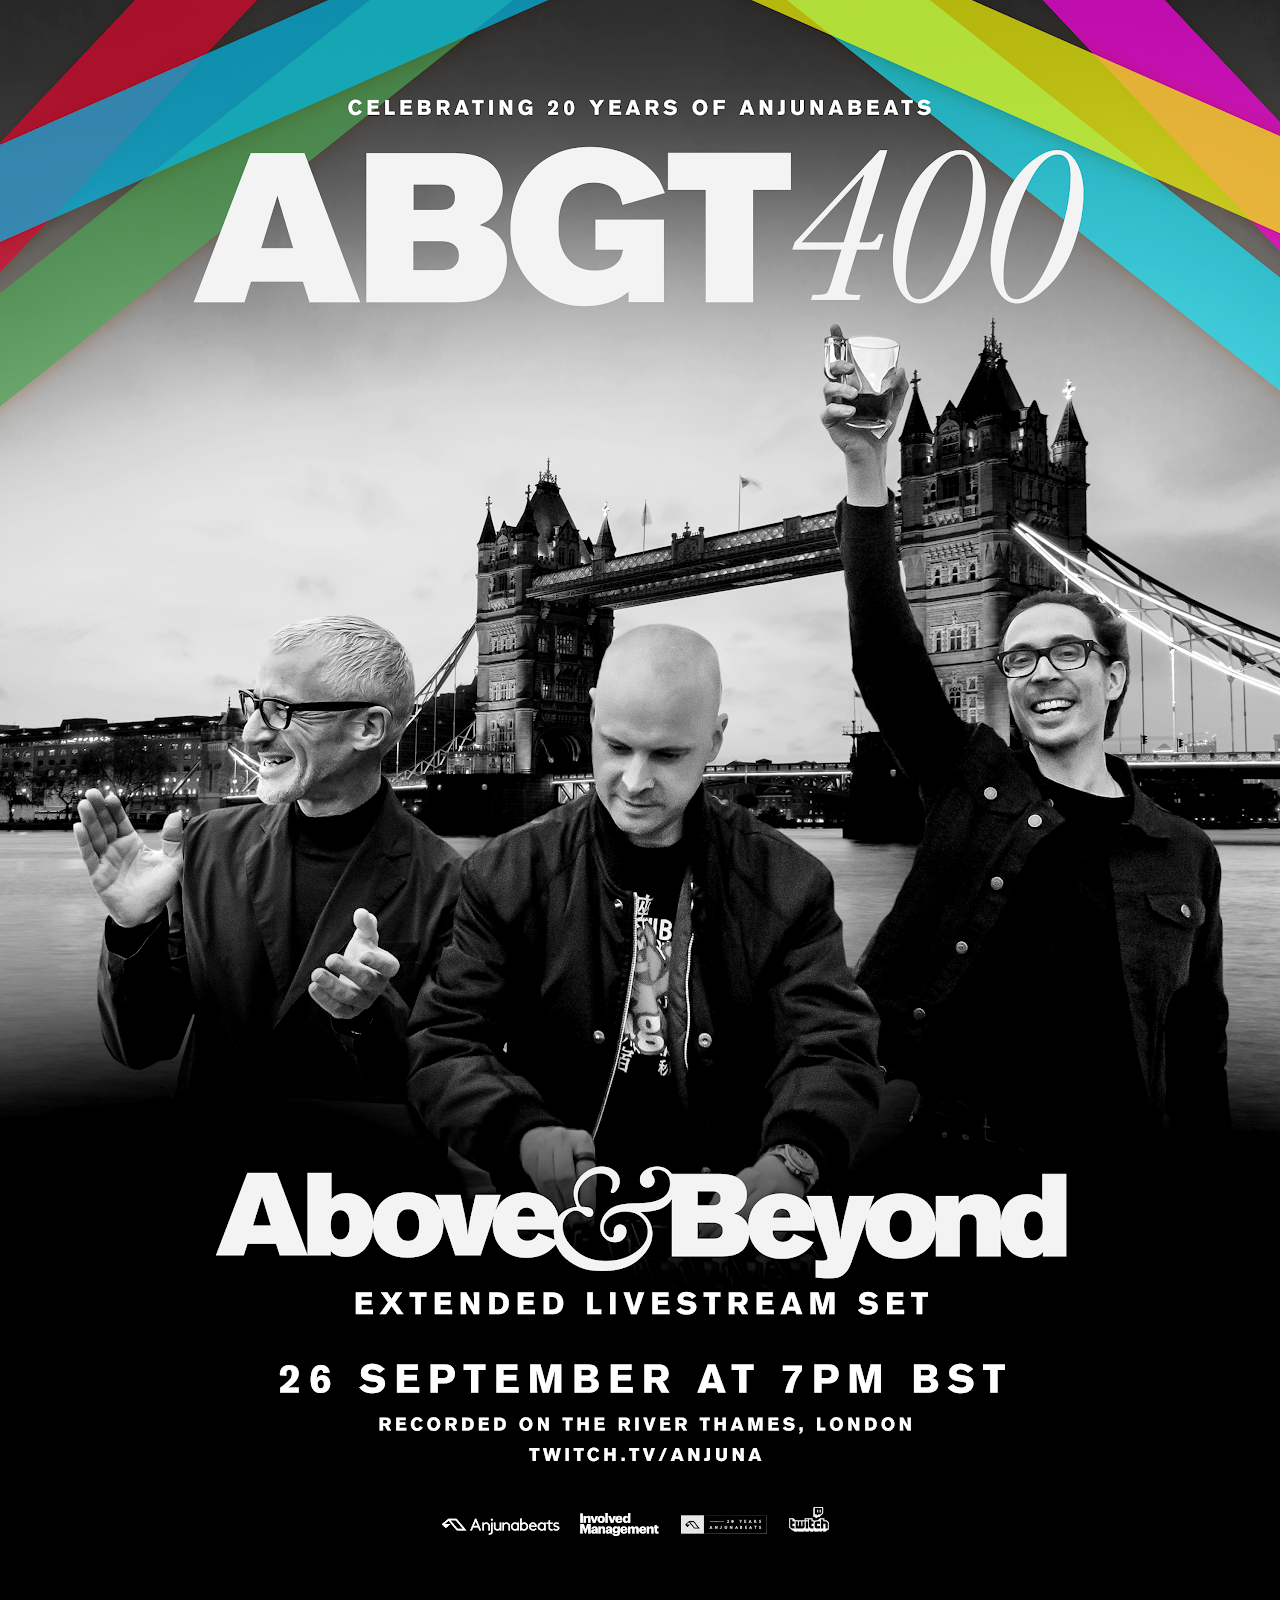 Above and Beyond presents Group Therapy 400 livestream party on Twitch on 26th of September 2020